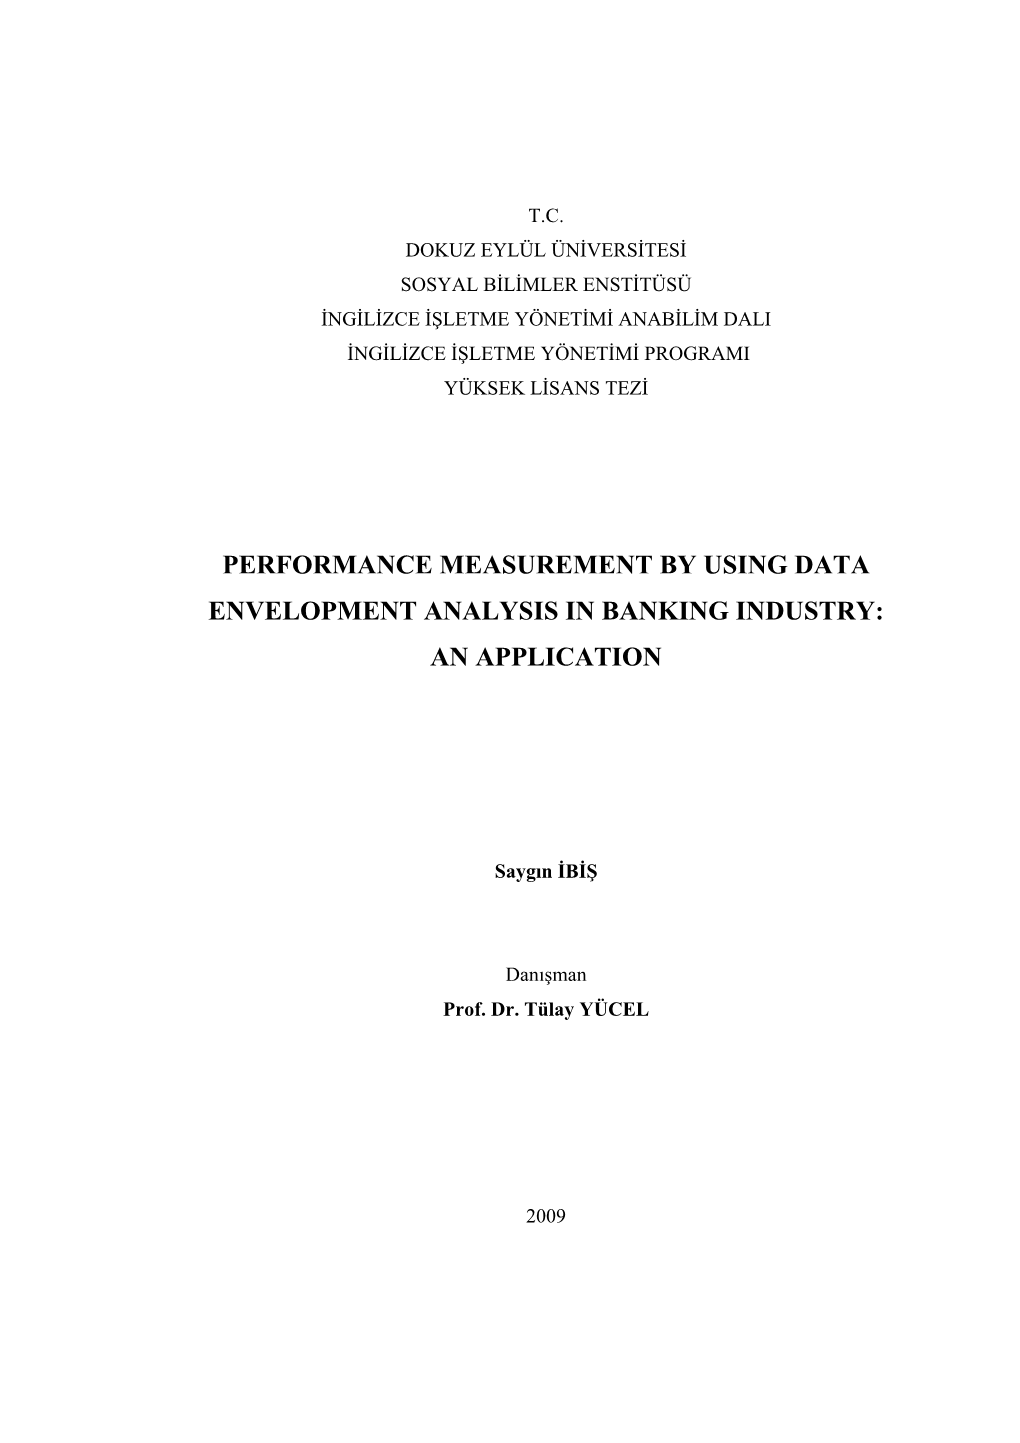 Performance Measurement by Using Data Envelopment Analysis in Banking Industry: an Application